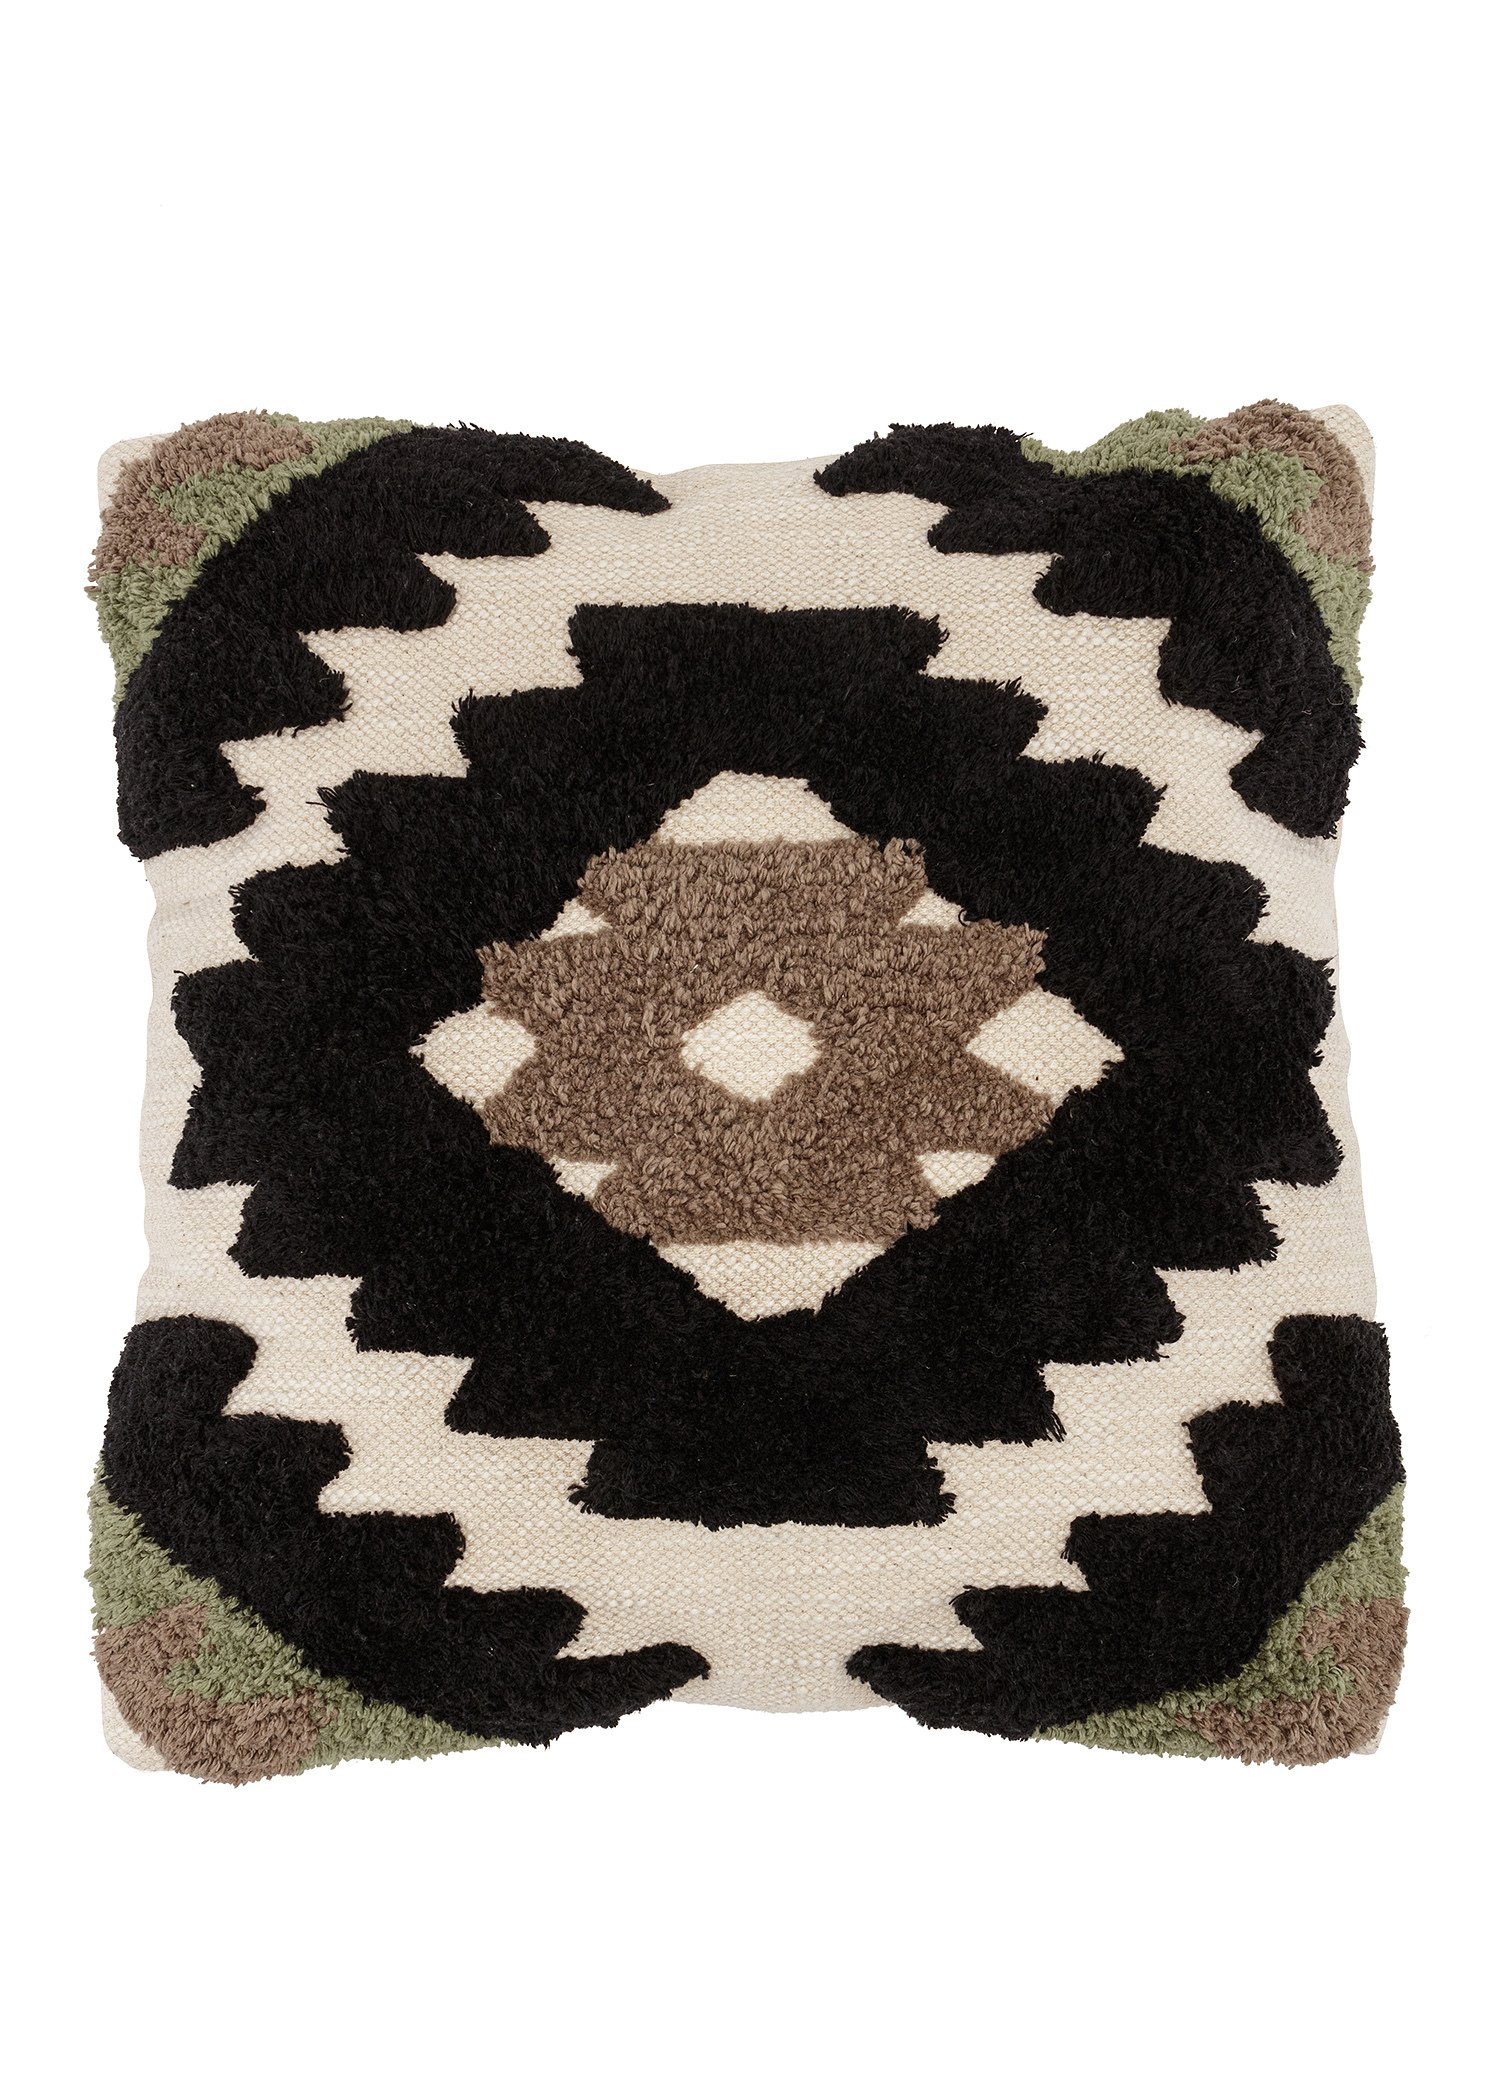 Patterned tufted cushion